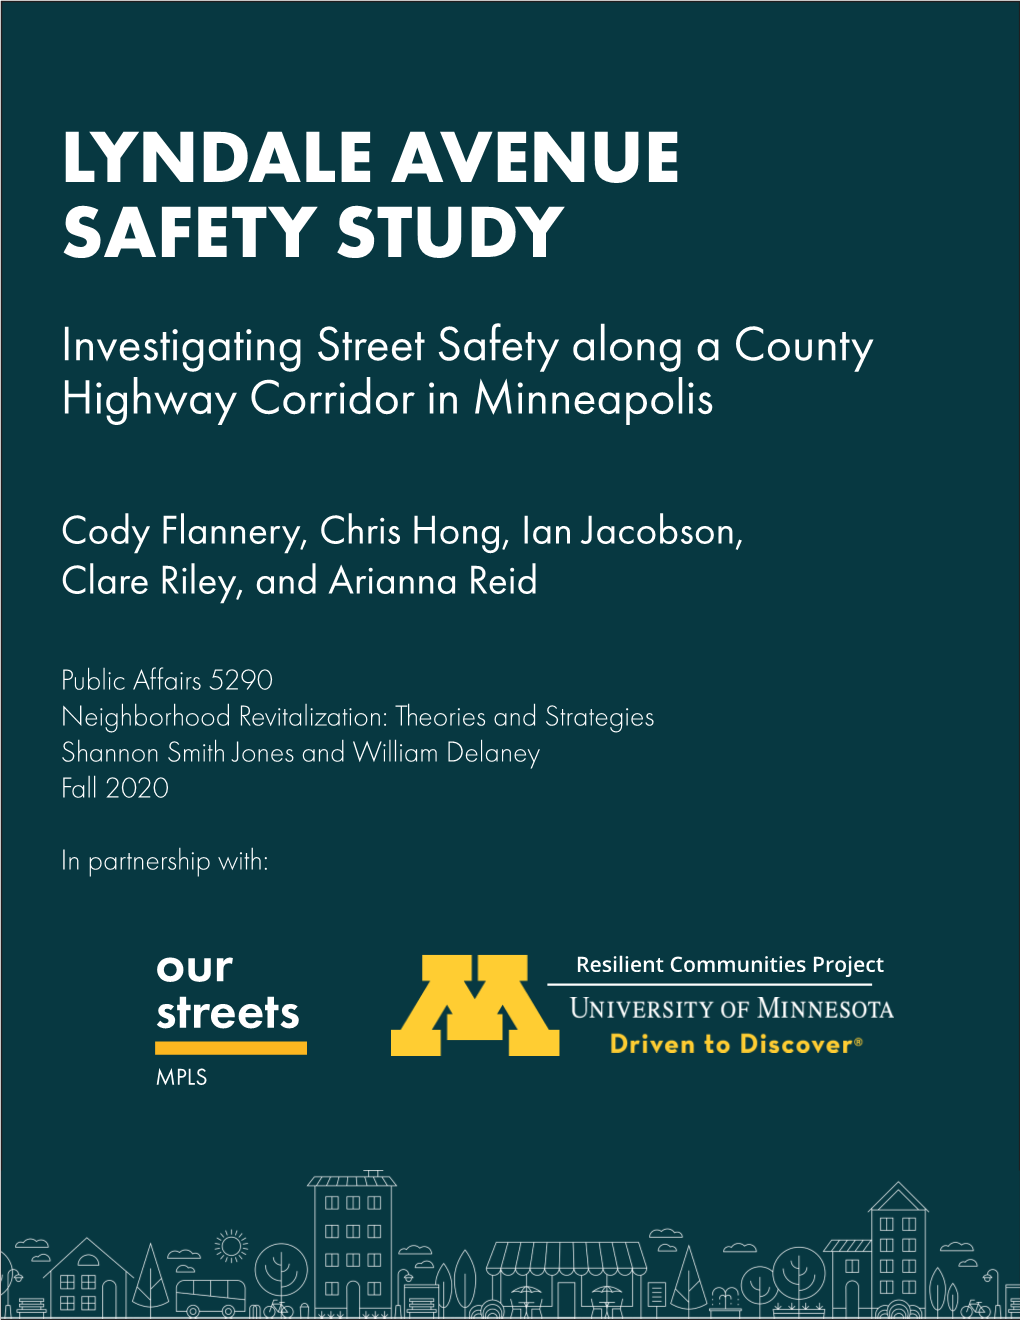 LYNDALE AVENUE SAFETY STUDY Investigating Street Safety Along a County Highway Corridor in Minneapolis